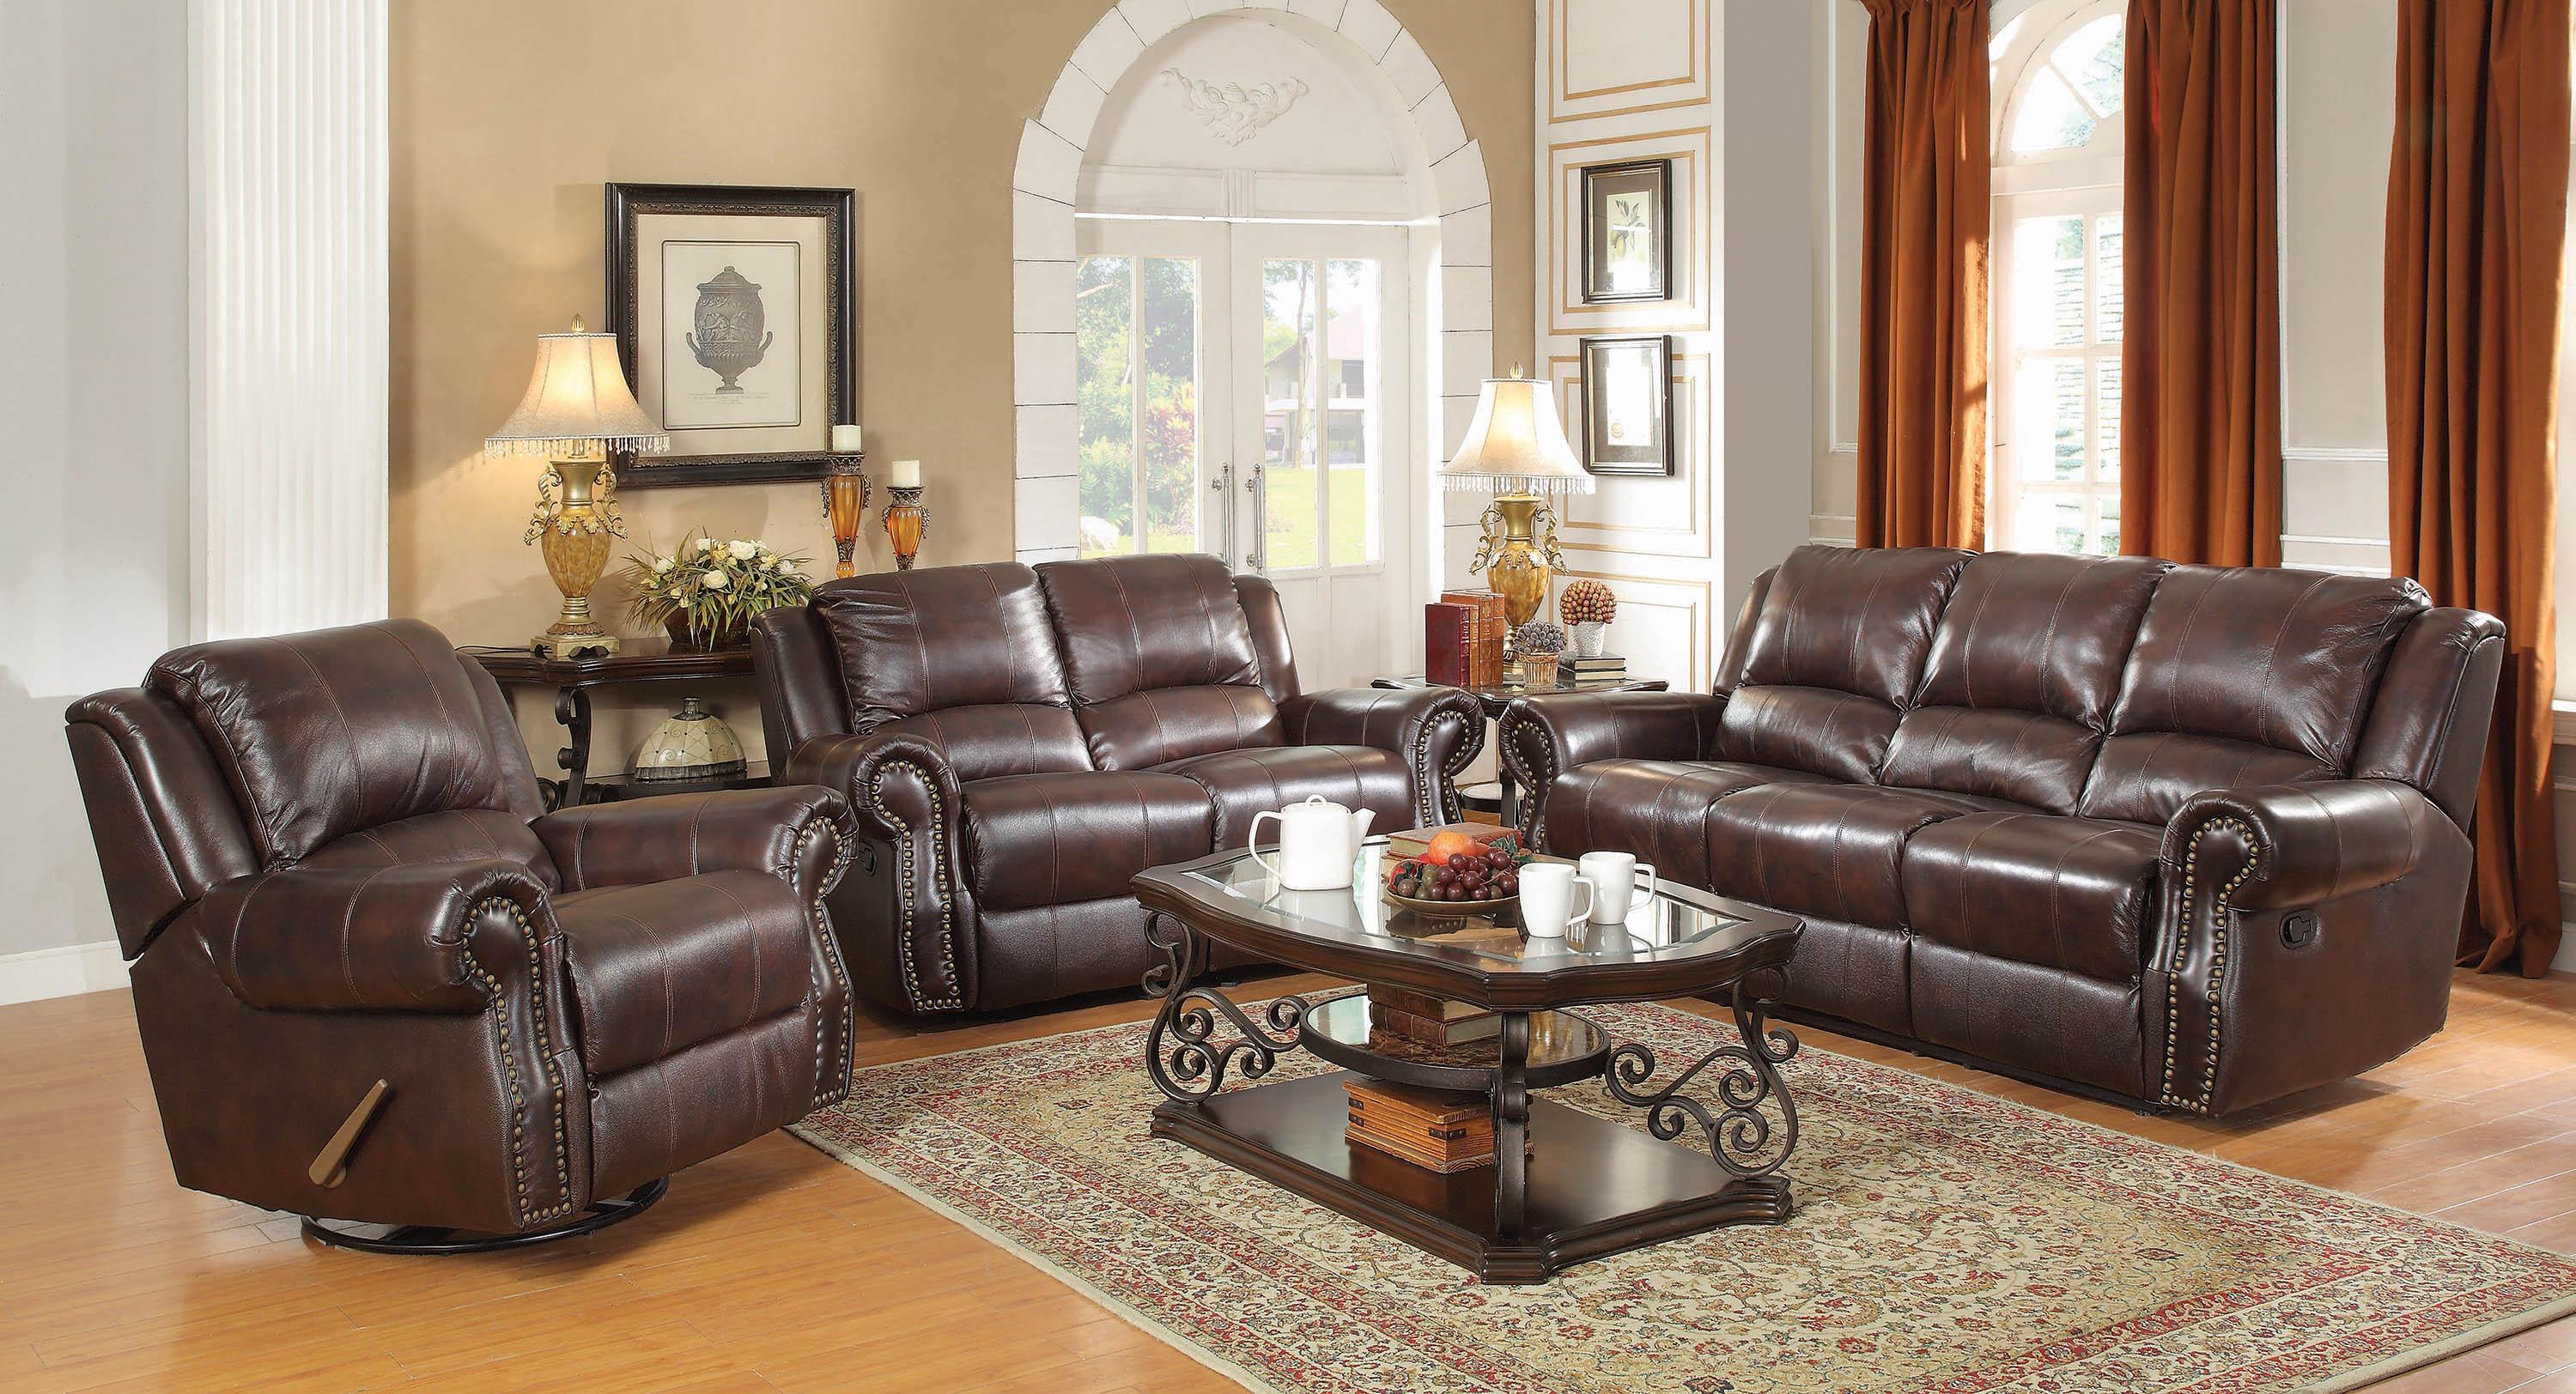 Traditional Living Room Set 650161-S3 Sir Rawlinson 650161-S3 in Dark Brown Leather